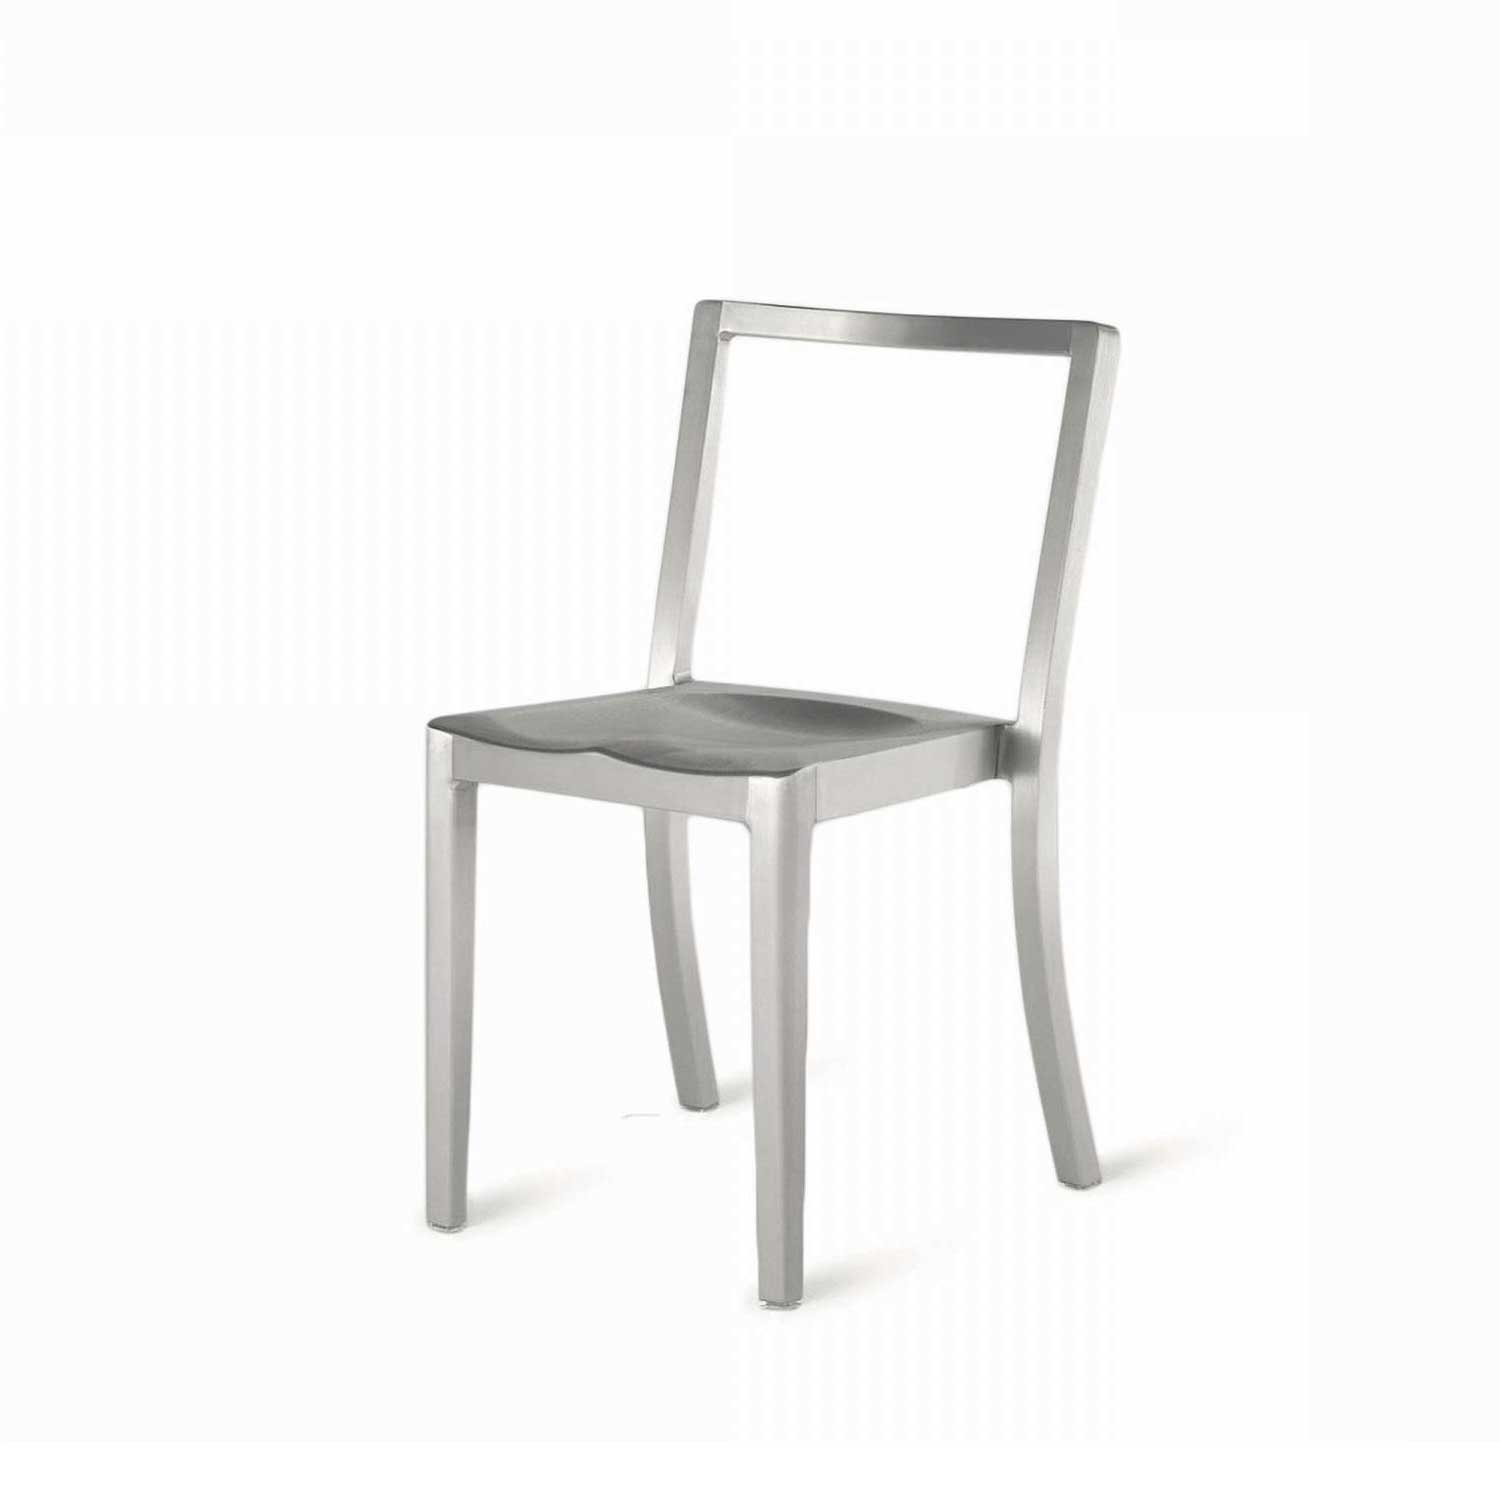 ICON　CHAIR